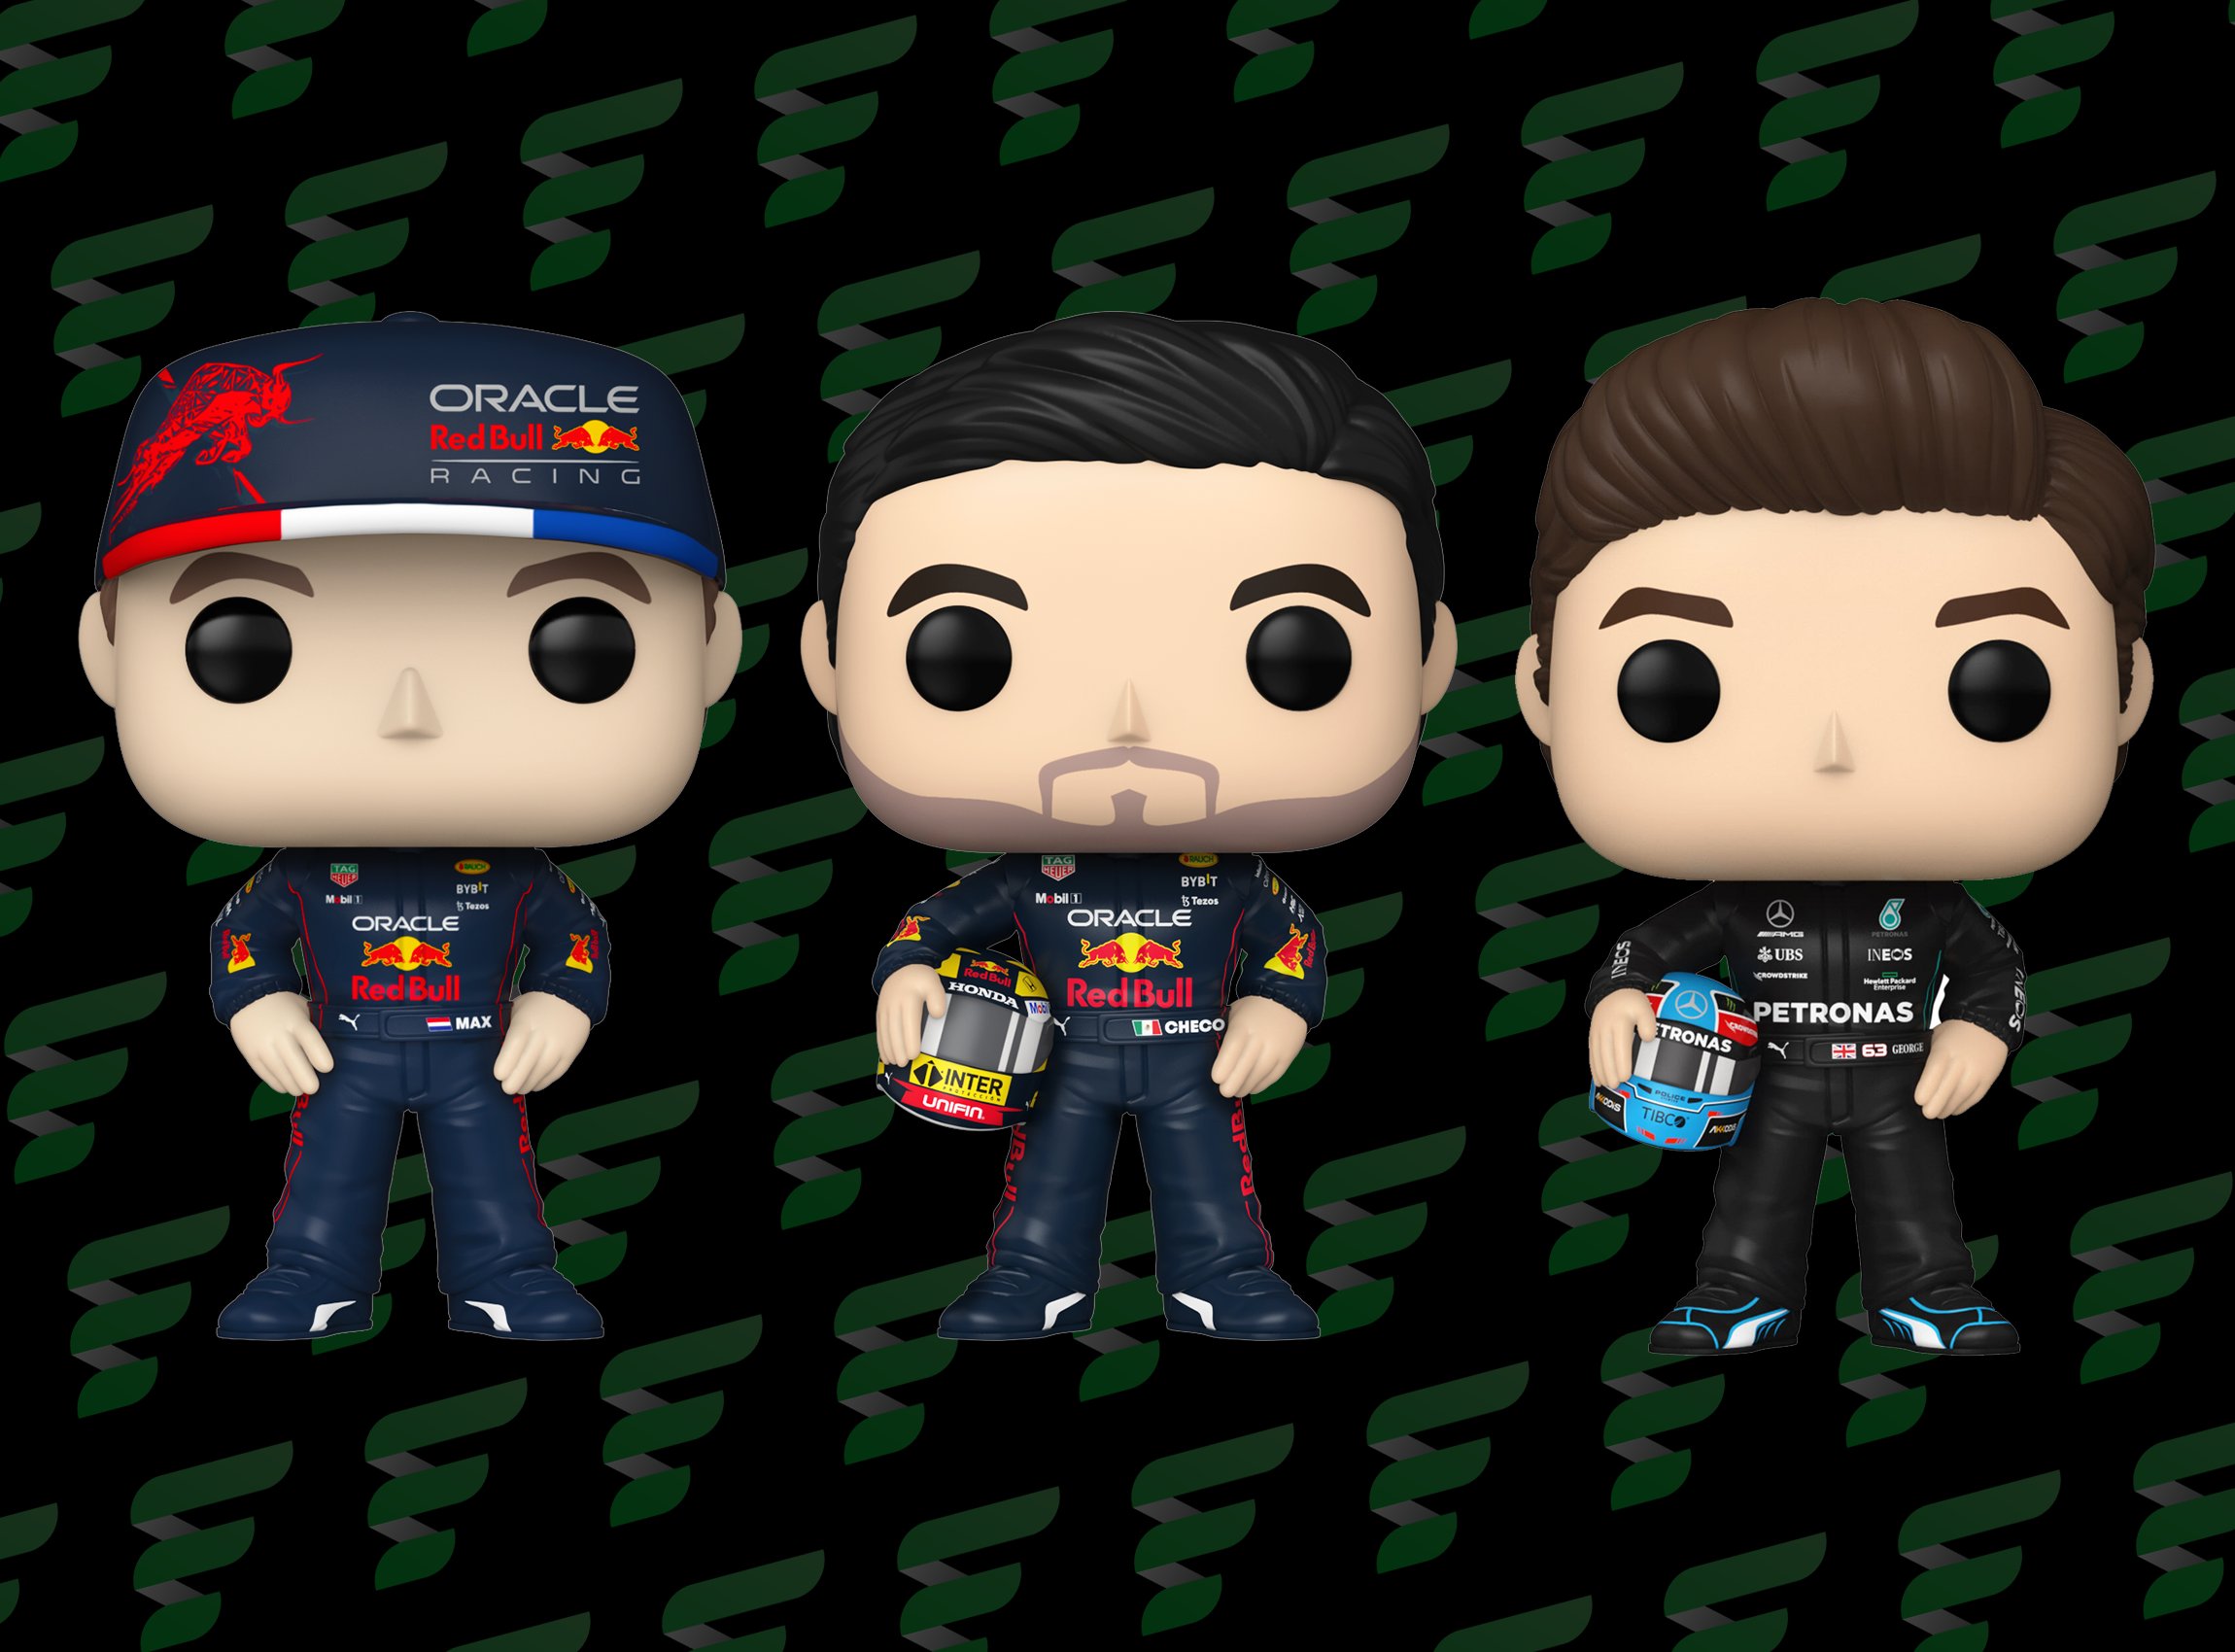 FunkoFinderz  Funko Pop! News & More! on X: First look at Funko Pop!  Formula 1 - Max Verstappen, Sergio Perez, and George Russell #Formula1 #F1  #Funko #Pop #FunkoPop #Collectibles #Toys #FunkoFinderz